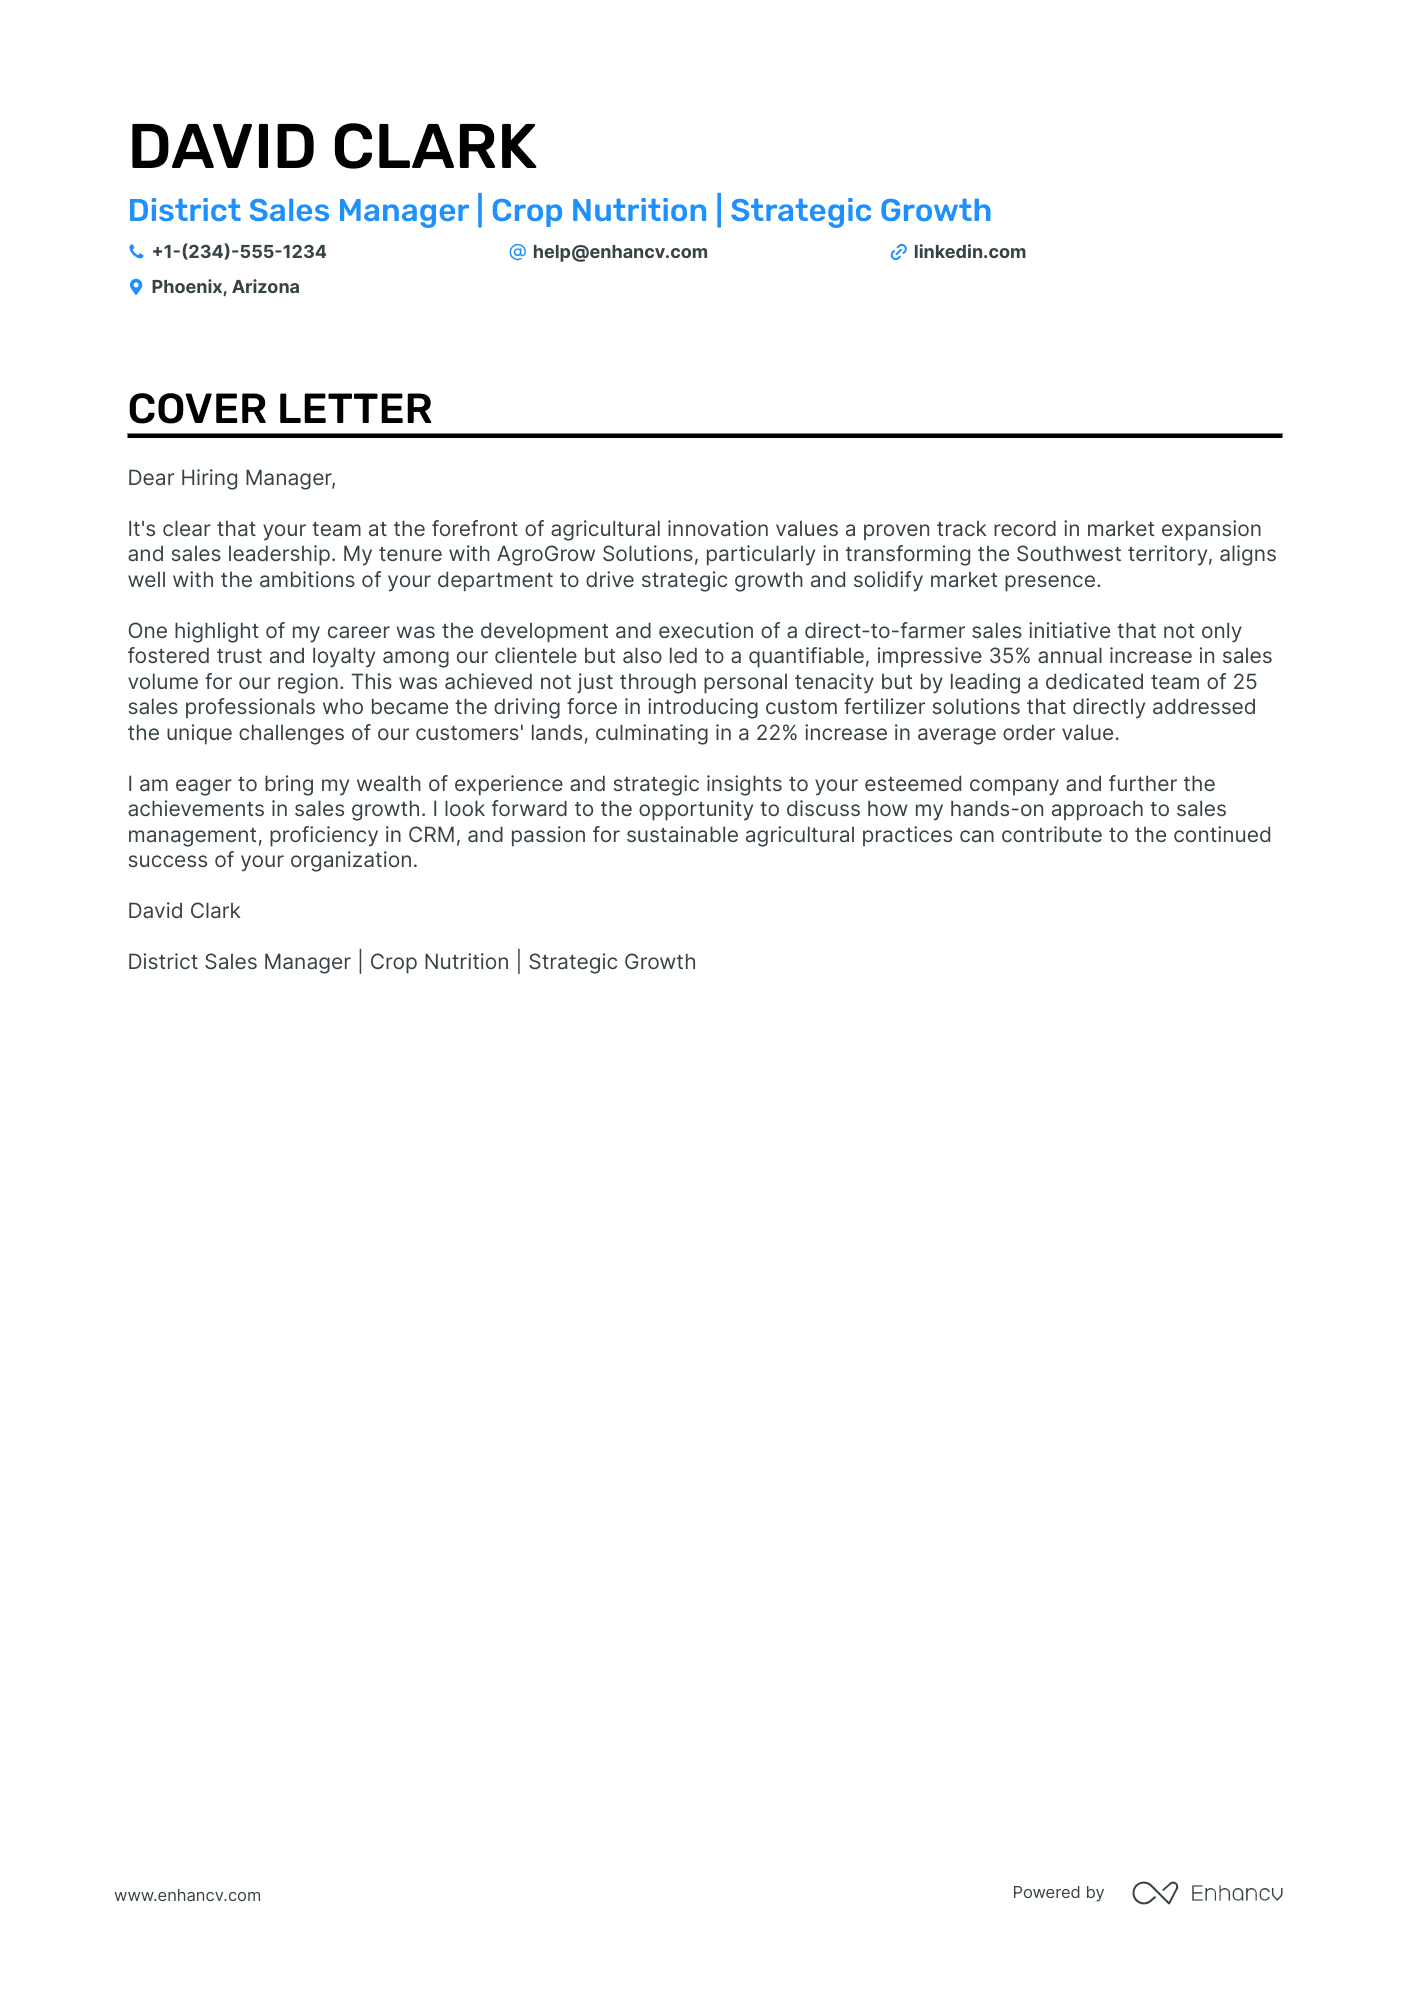 District Sales Manager cover letter